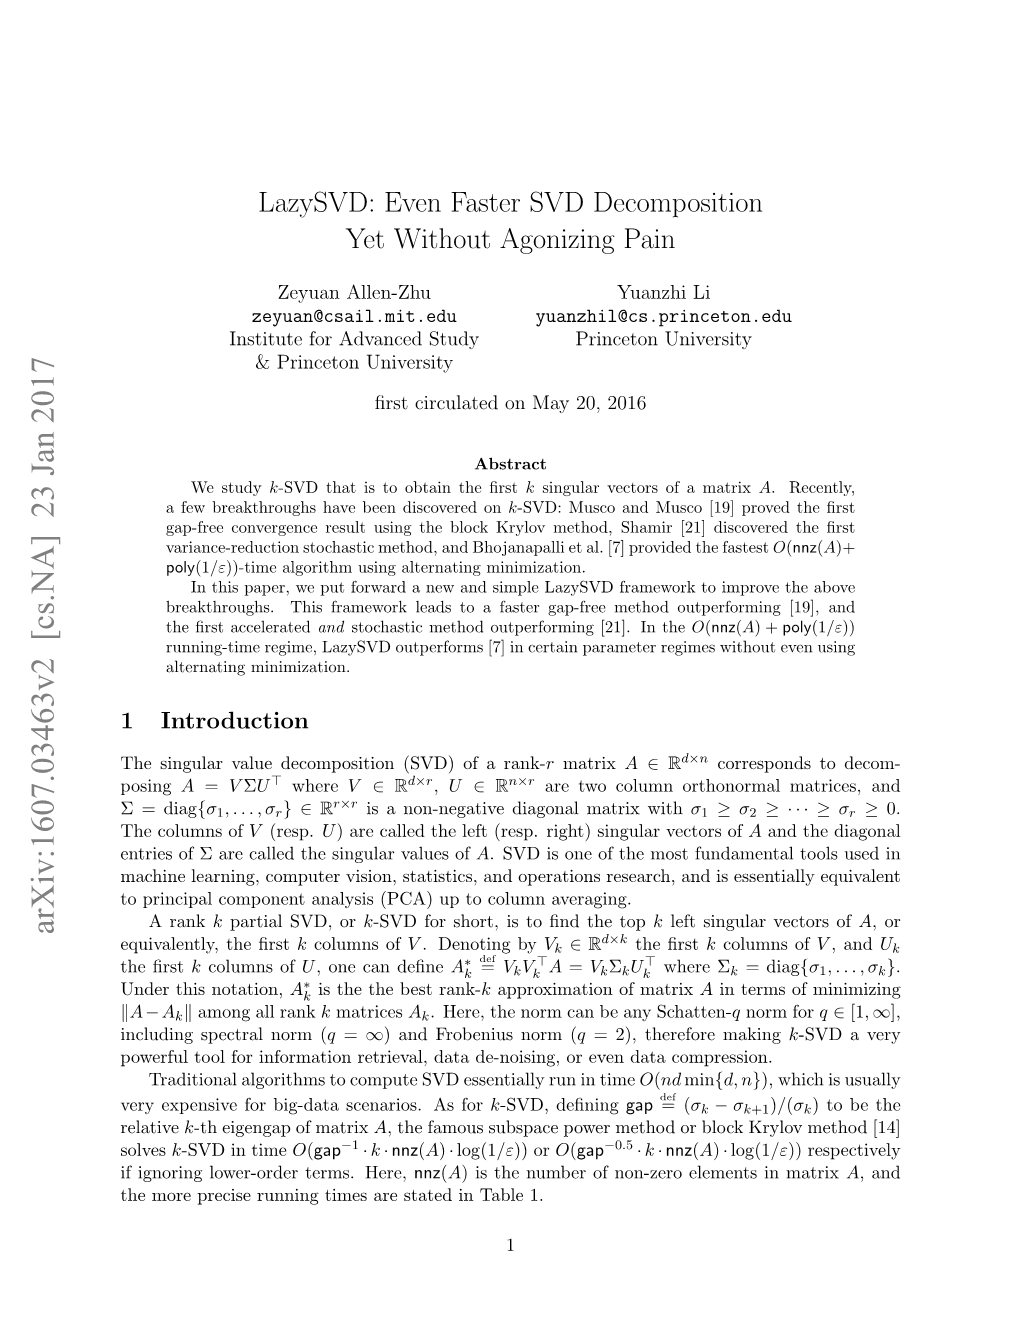 Lazysvd: Even Faster SVD Decomposition Yet Without Agonizing Pain